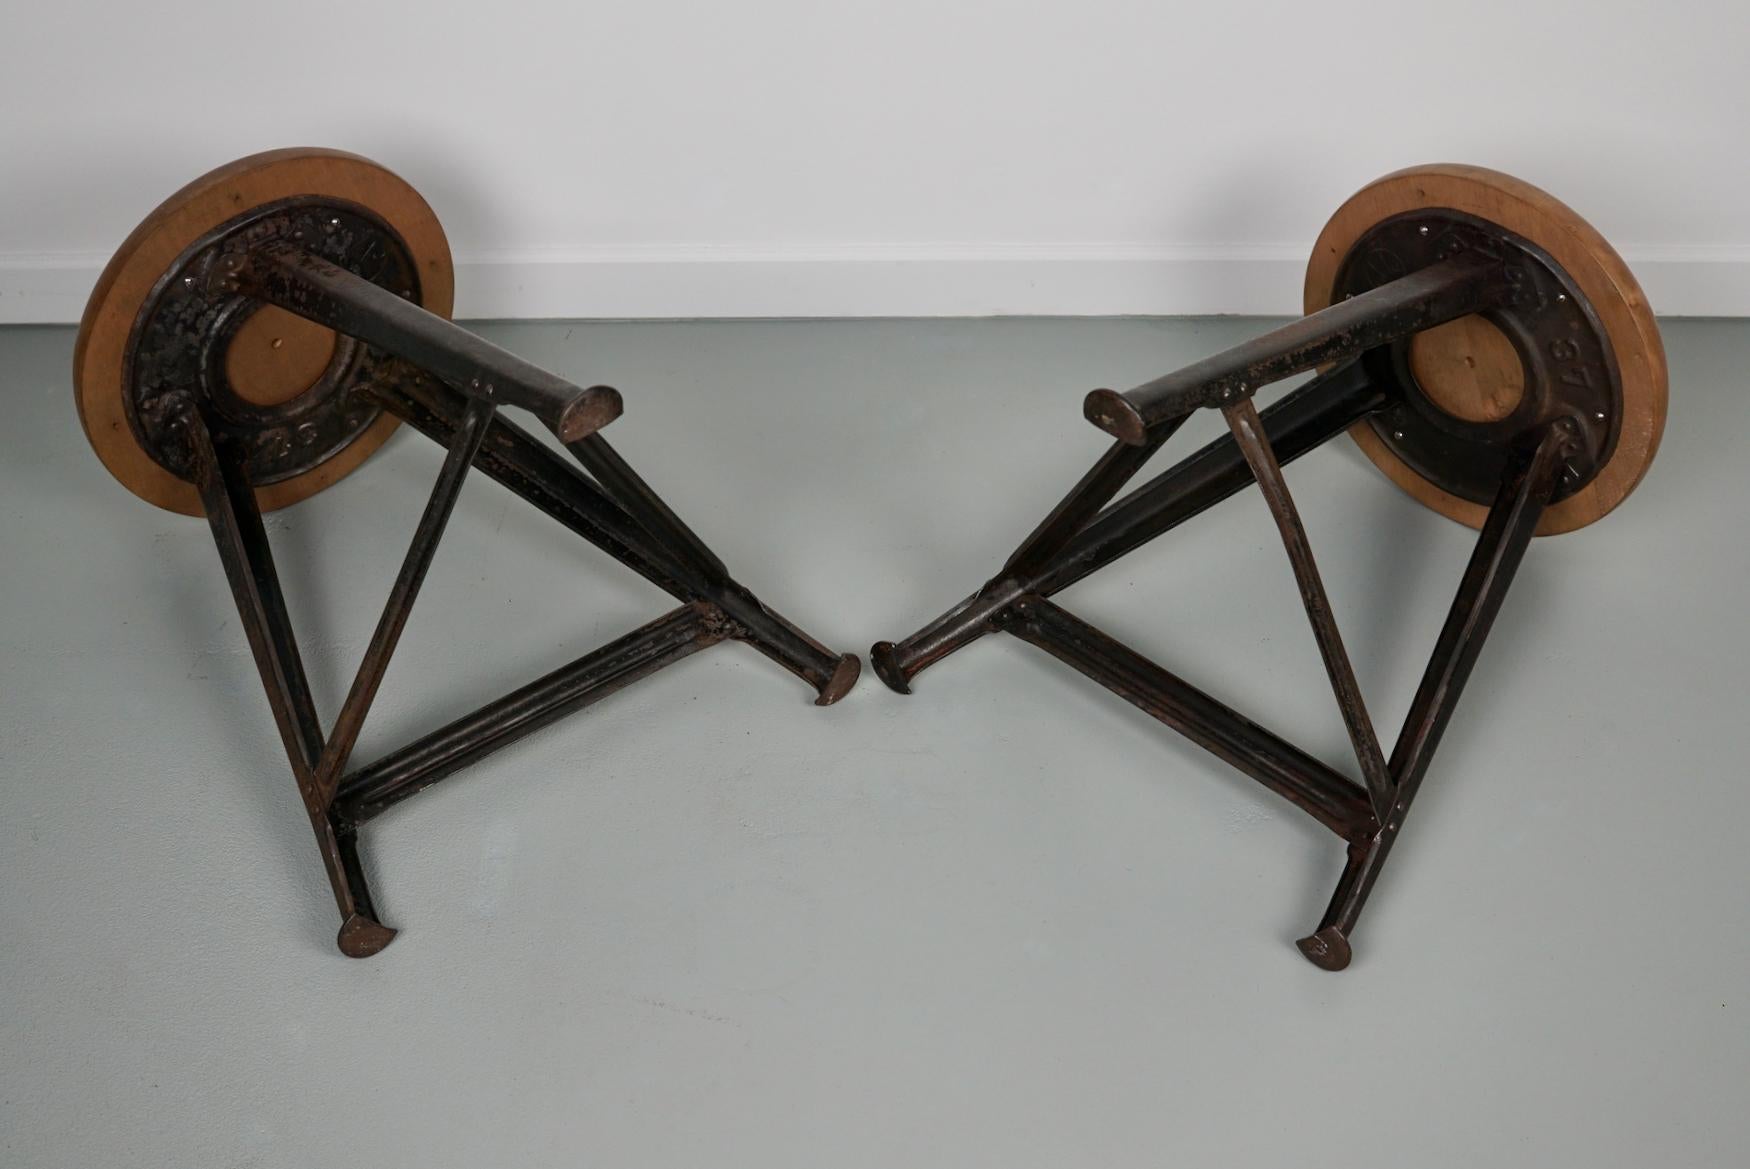 Pair of Industrial Steel Factory Stools by Rowac Robert Wagner Chemnitz, 1930s For Sale 2